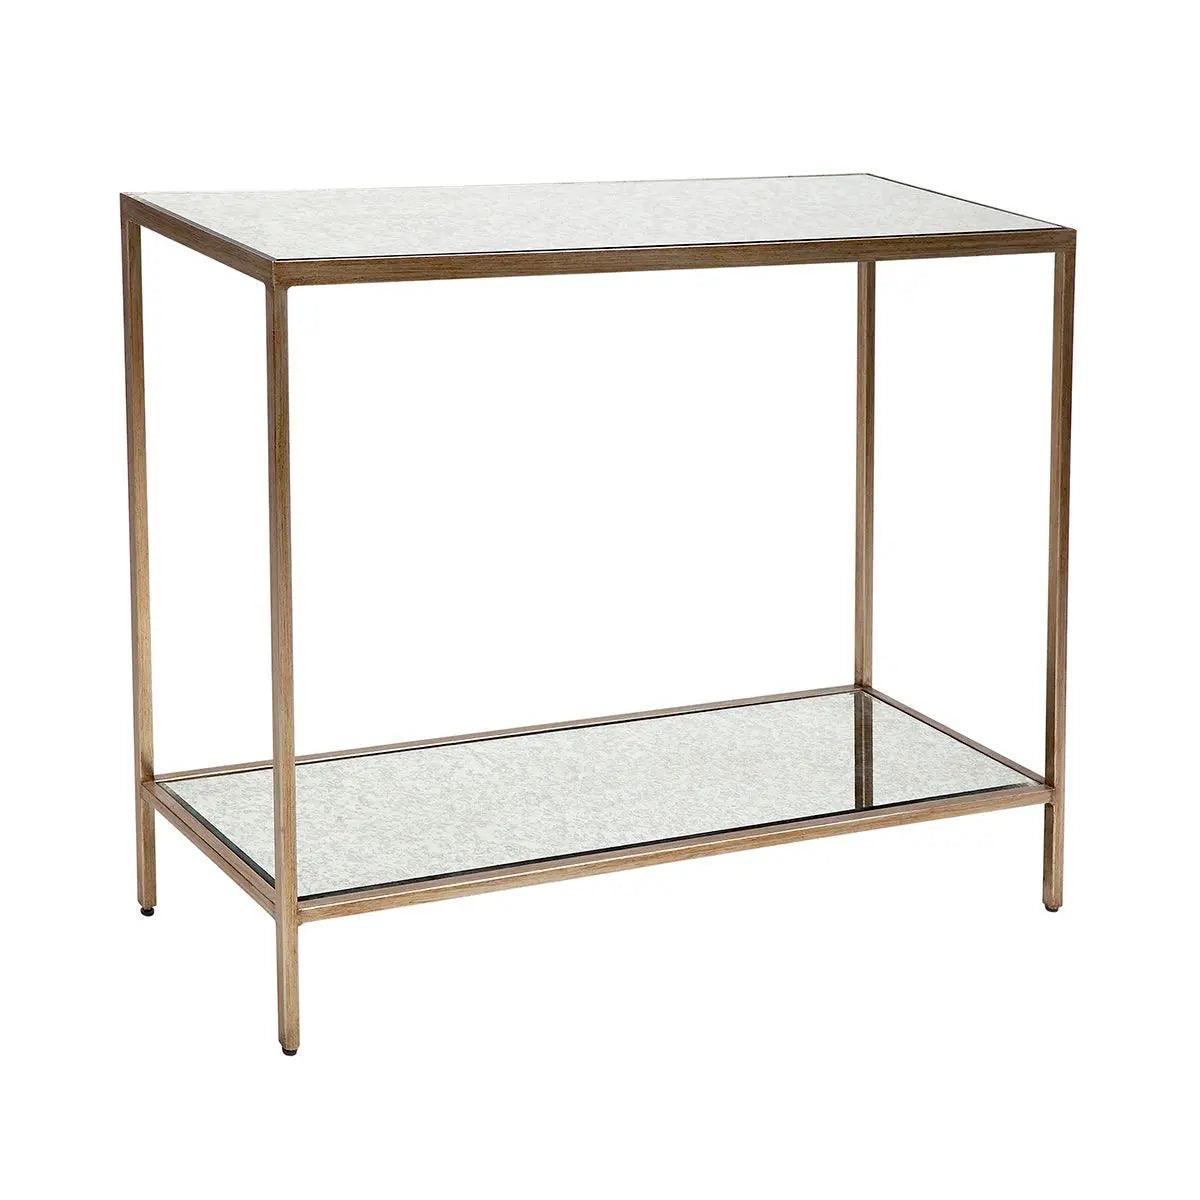 Cafe Lighting & Living Cocktail Mirrored Console Table - Small Antique Gold - Console Table322169320294115527 2